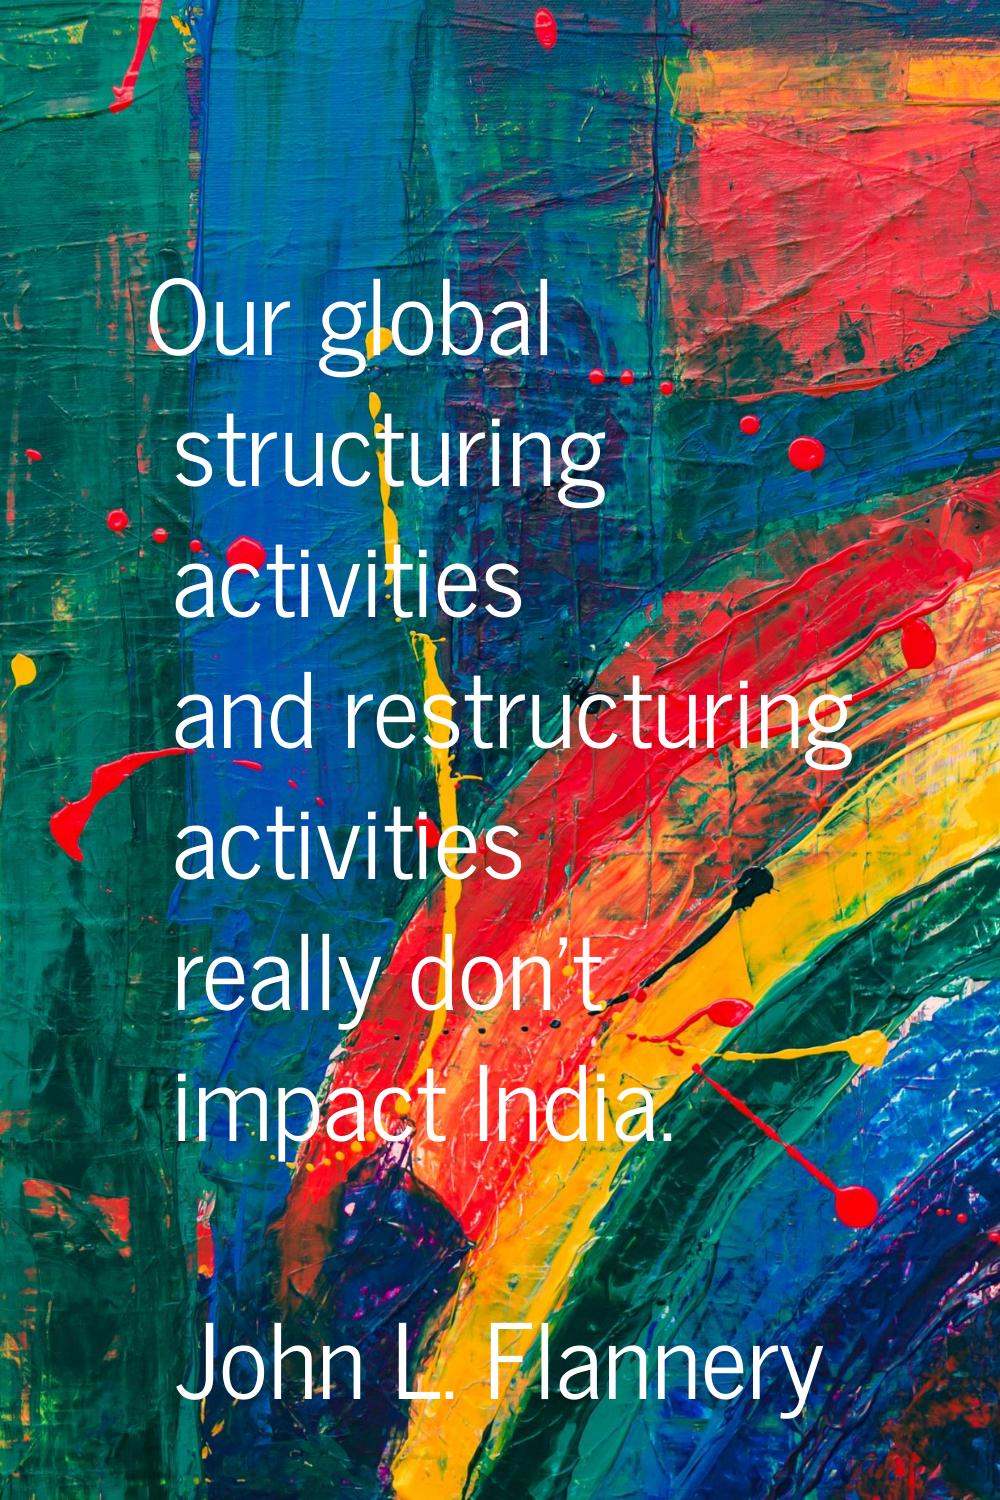 Our global structuring activities and restructuring activities really don't impact India.